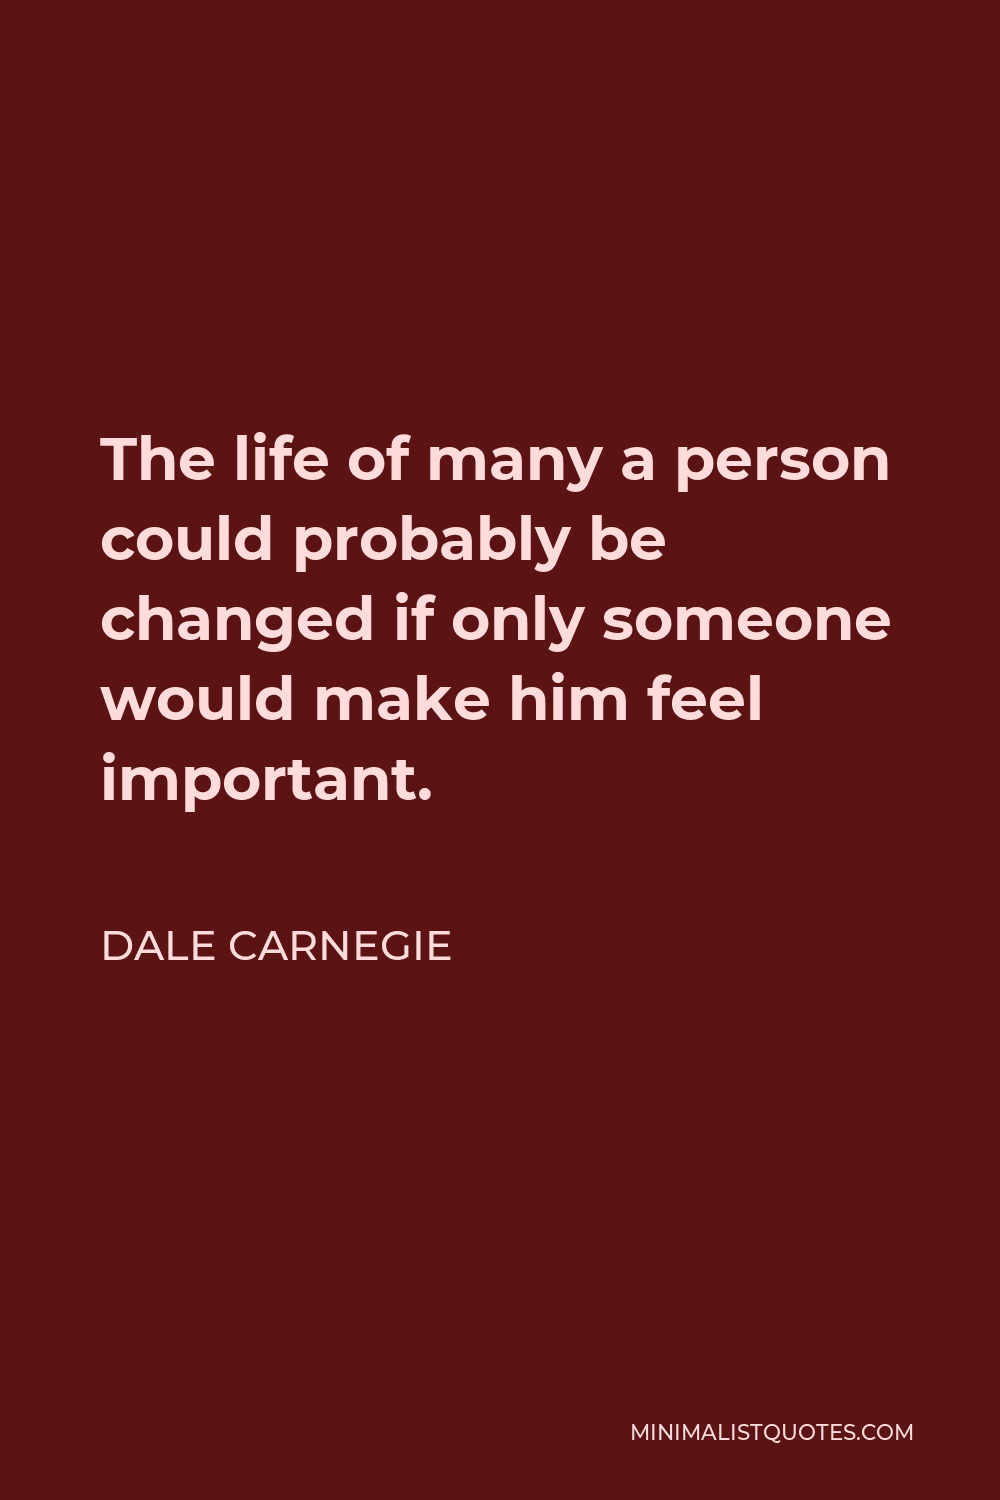 Dale Carnegie Quote - The life of many a person could probably be changed if only someone would make him feel important.